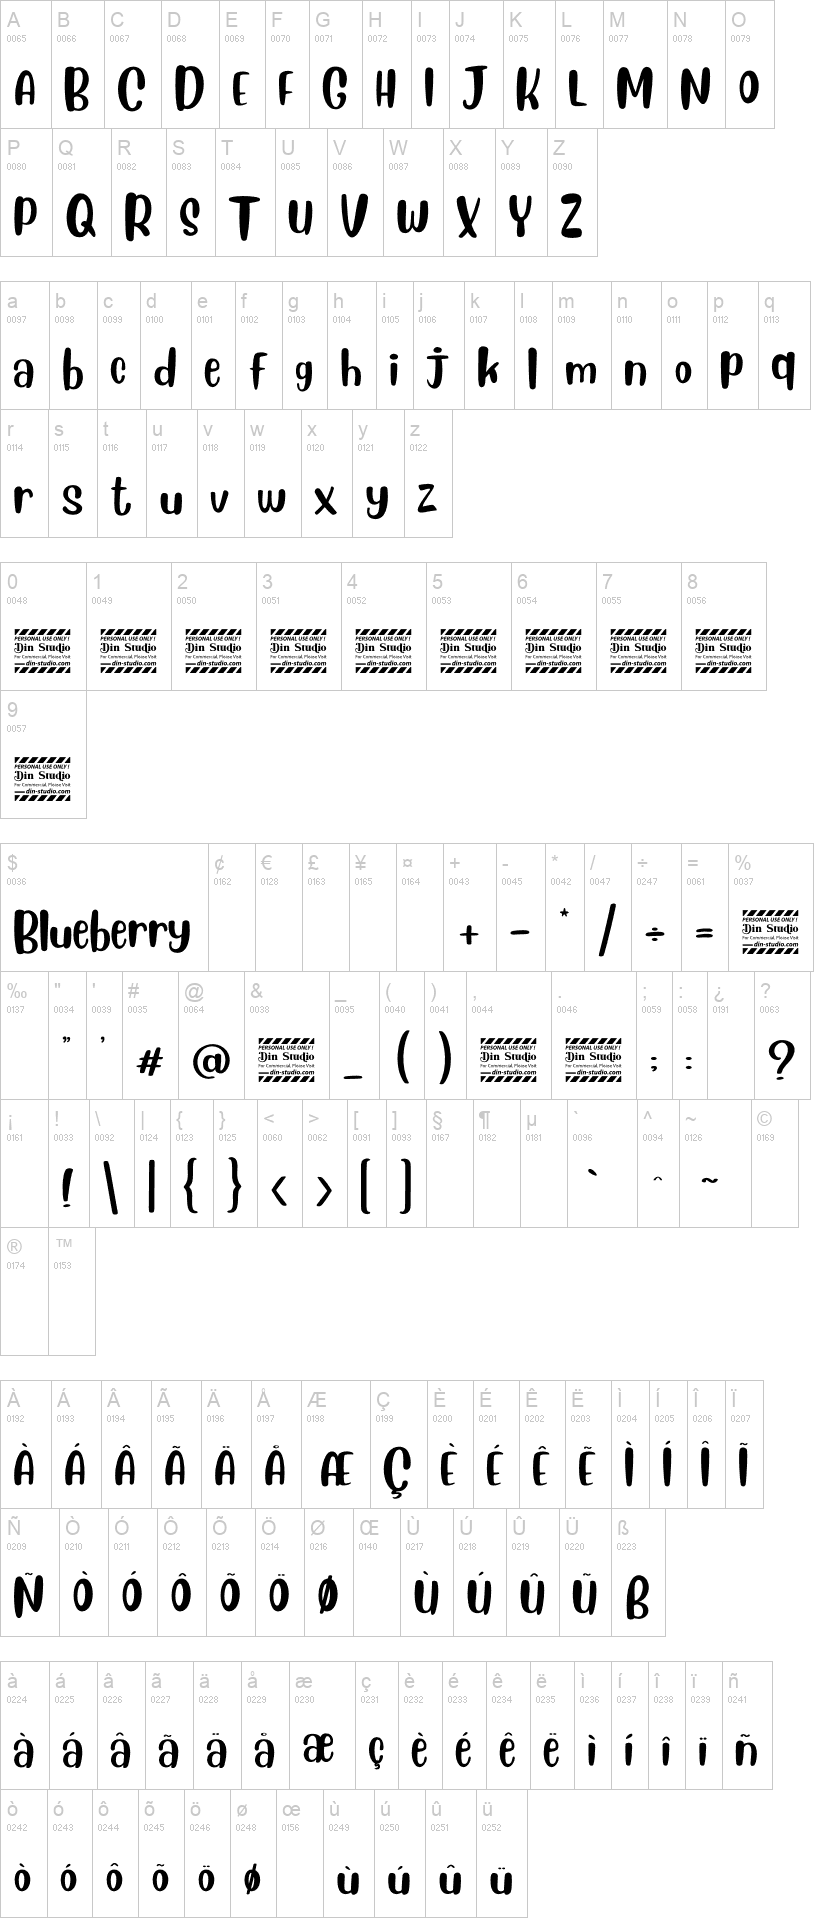 Blueberry font download download adobe flash player for windows